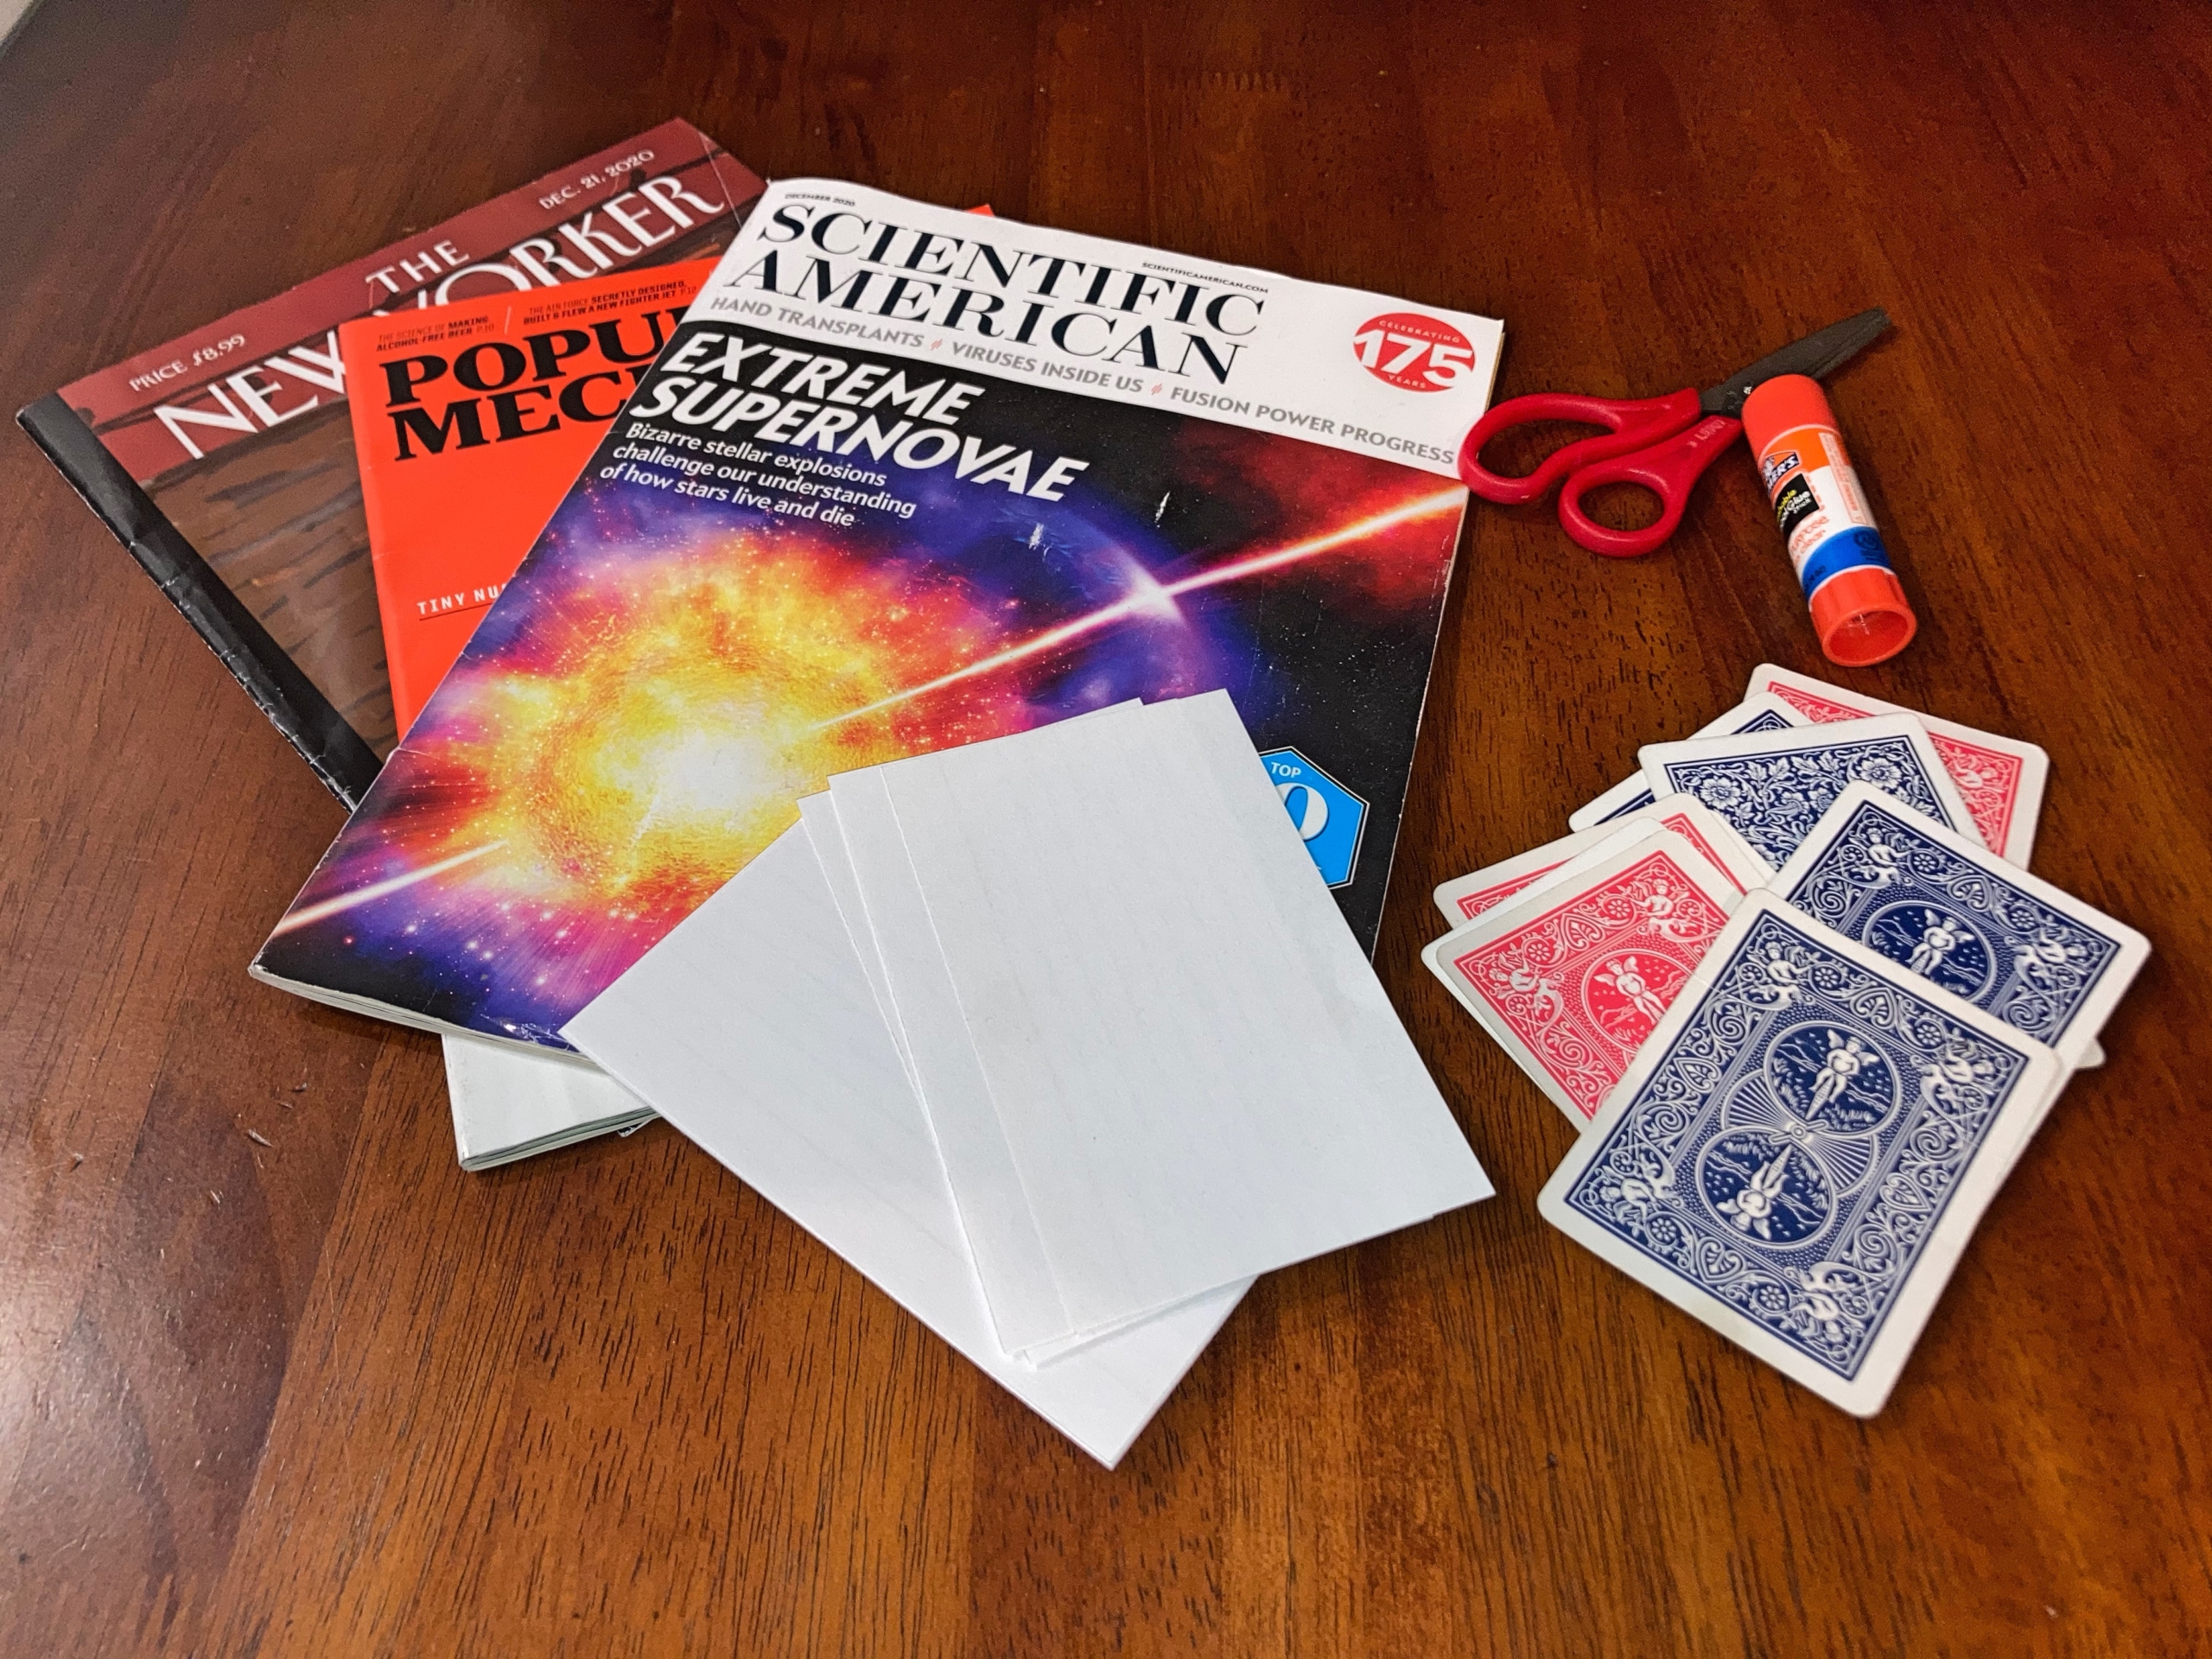 Pile of magazines, playing cards, glue and index cards